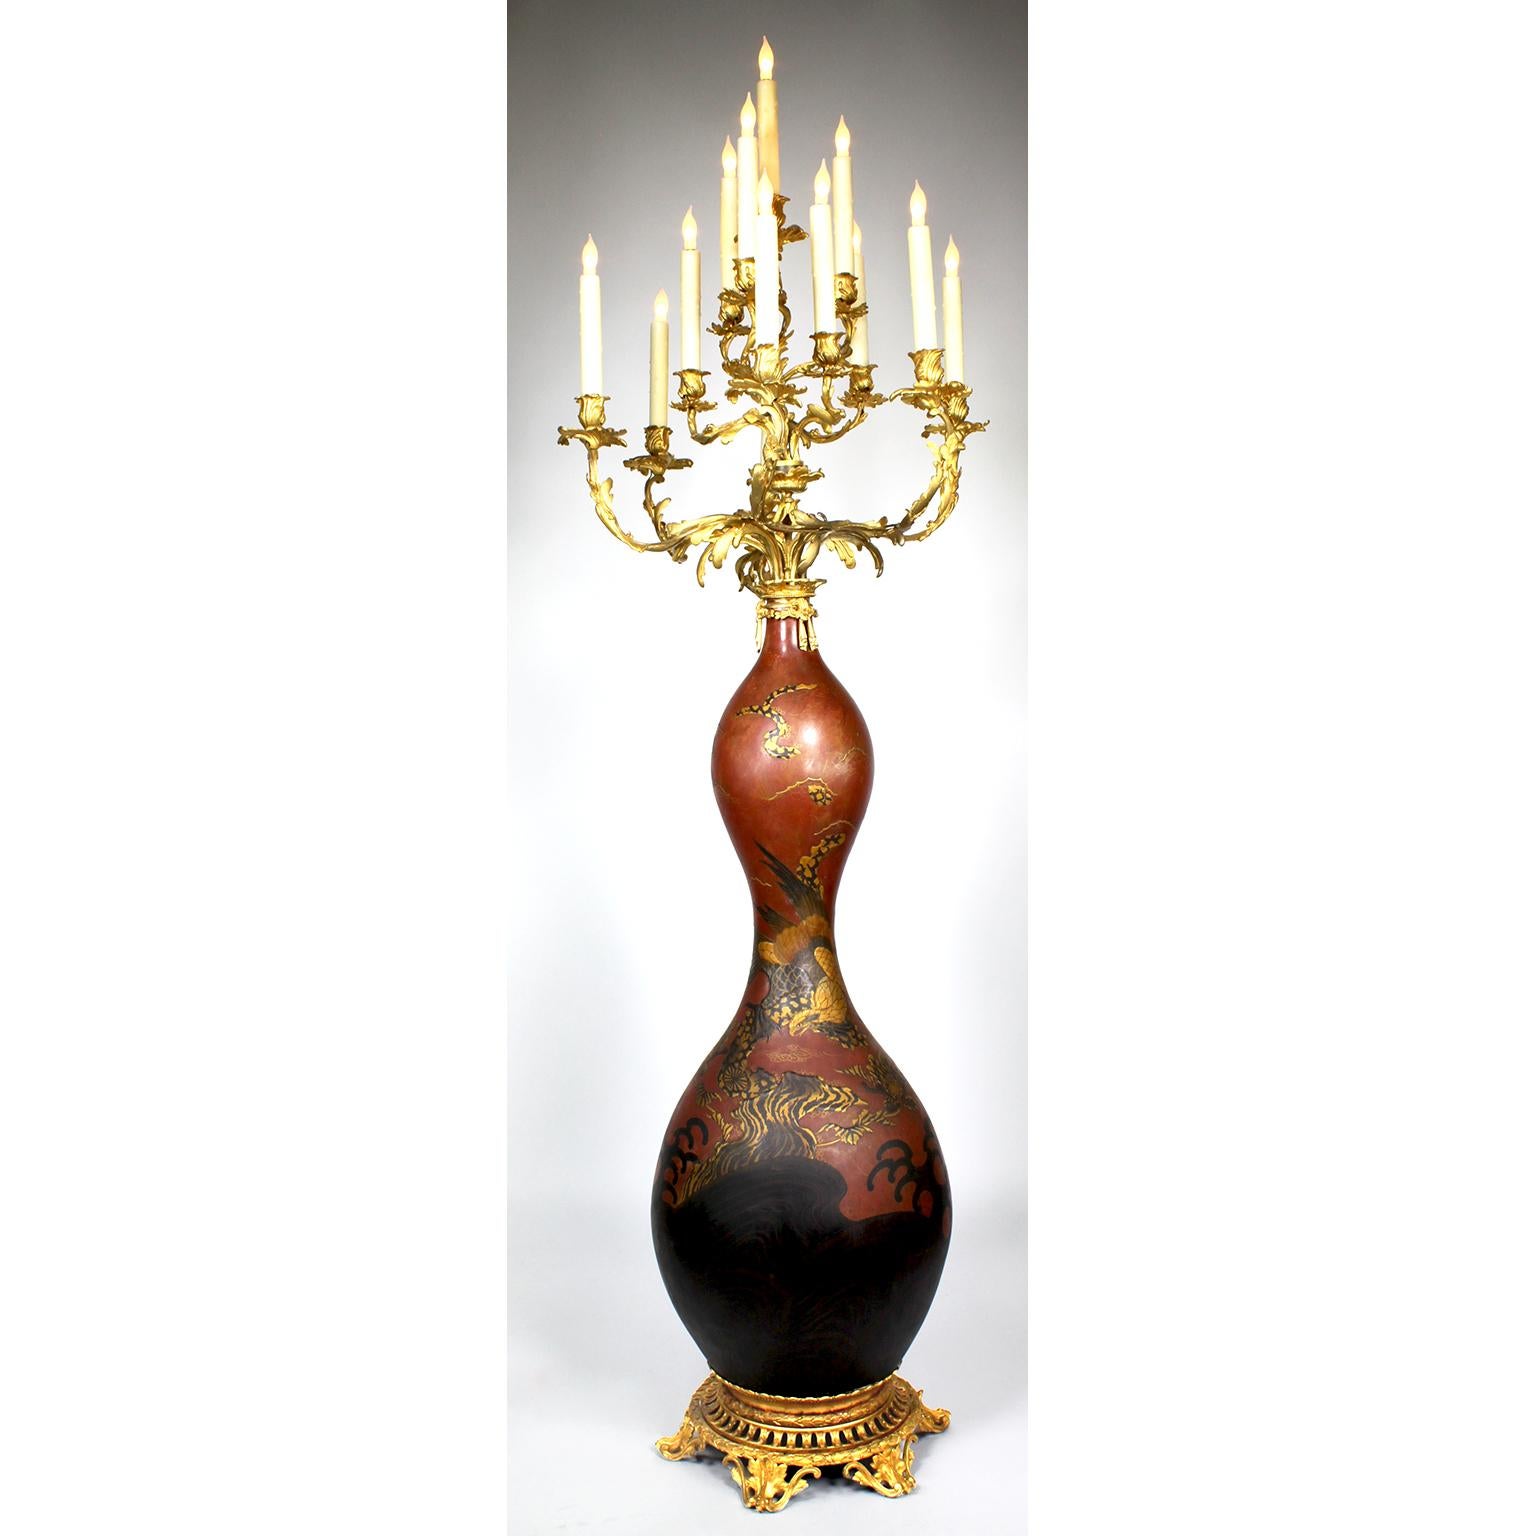 A fine Pair of 19th century Japanese Imari Porcelain and French Gilt-Bronze Mounted Thirteen-Light Celadon Torchere Candelabra. The bottle-shaped Japonisme vases with a Royal red background, decorated with parcel-gilt and black soaring eagles in the